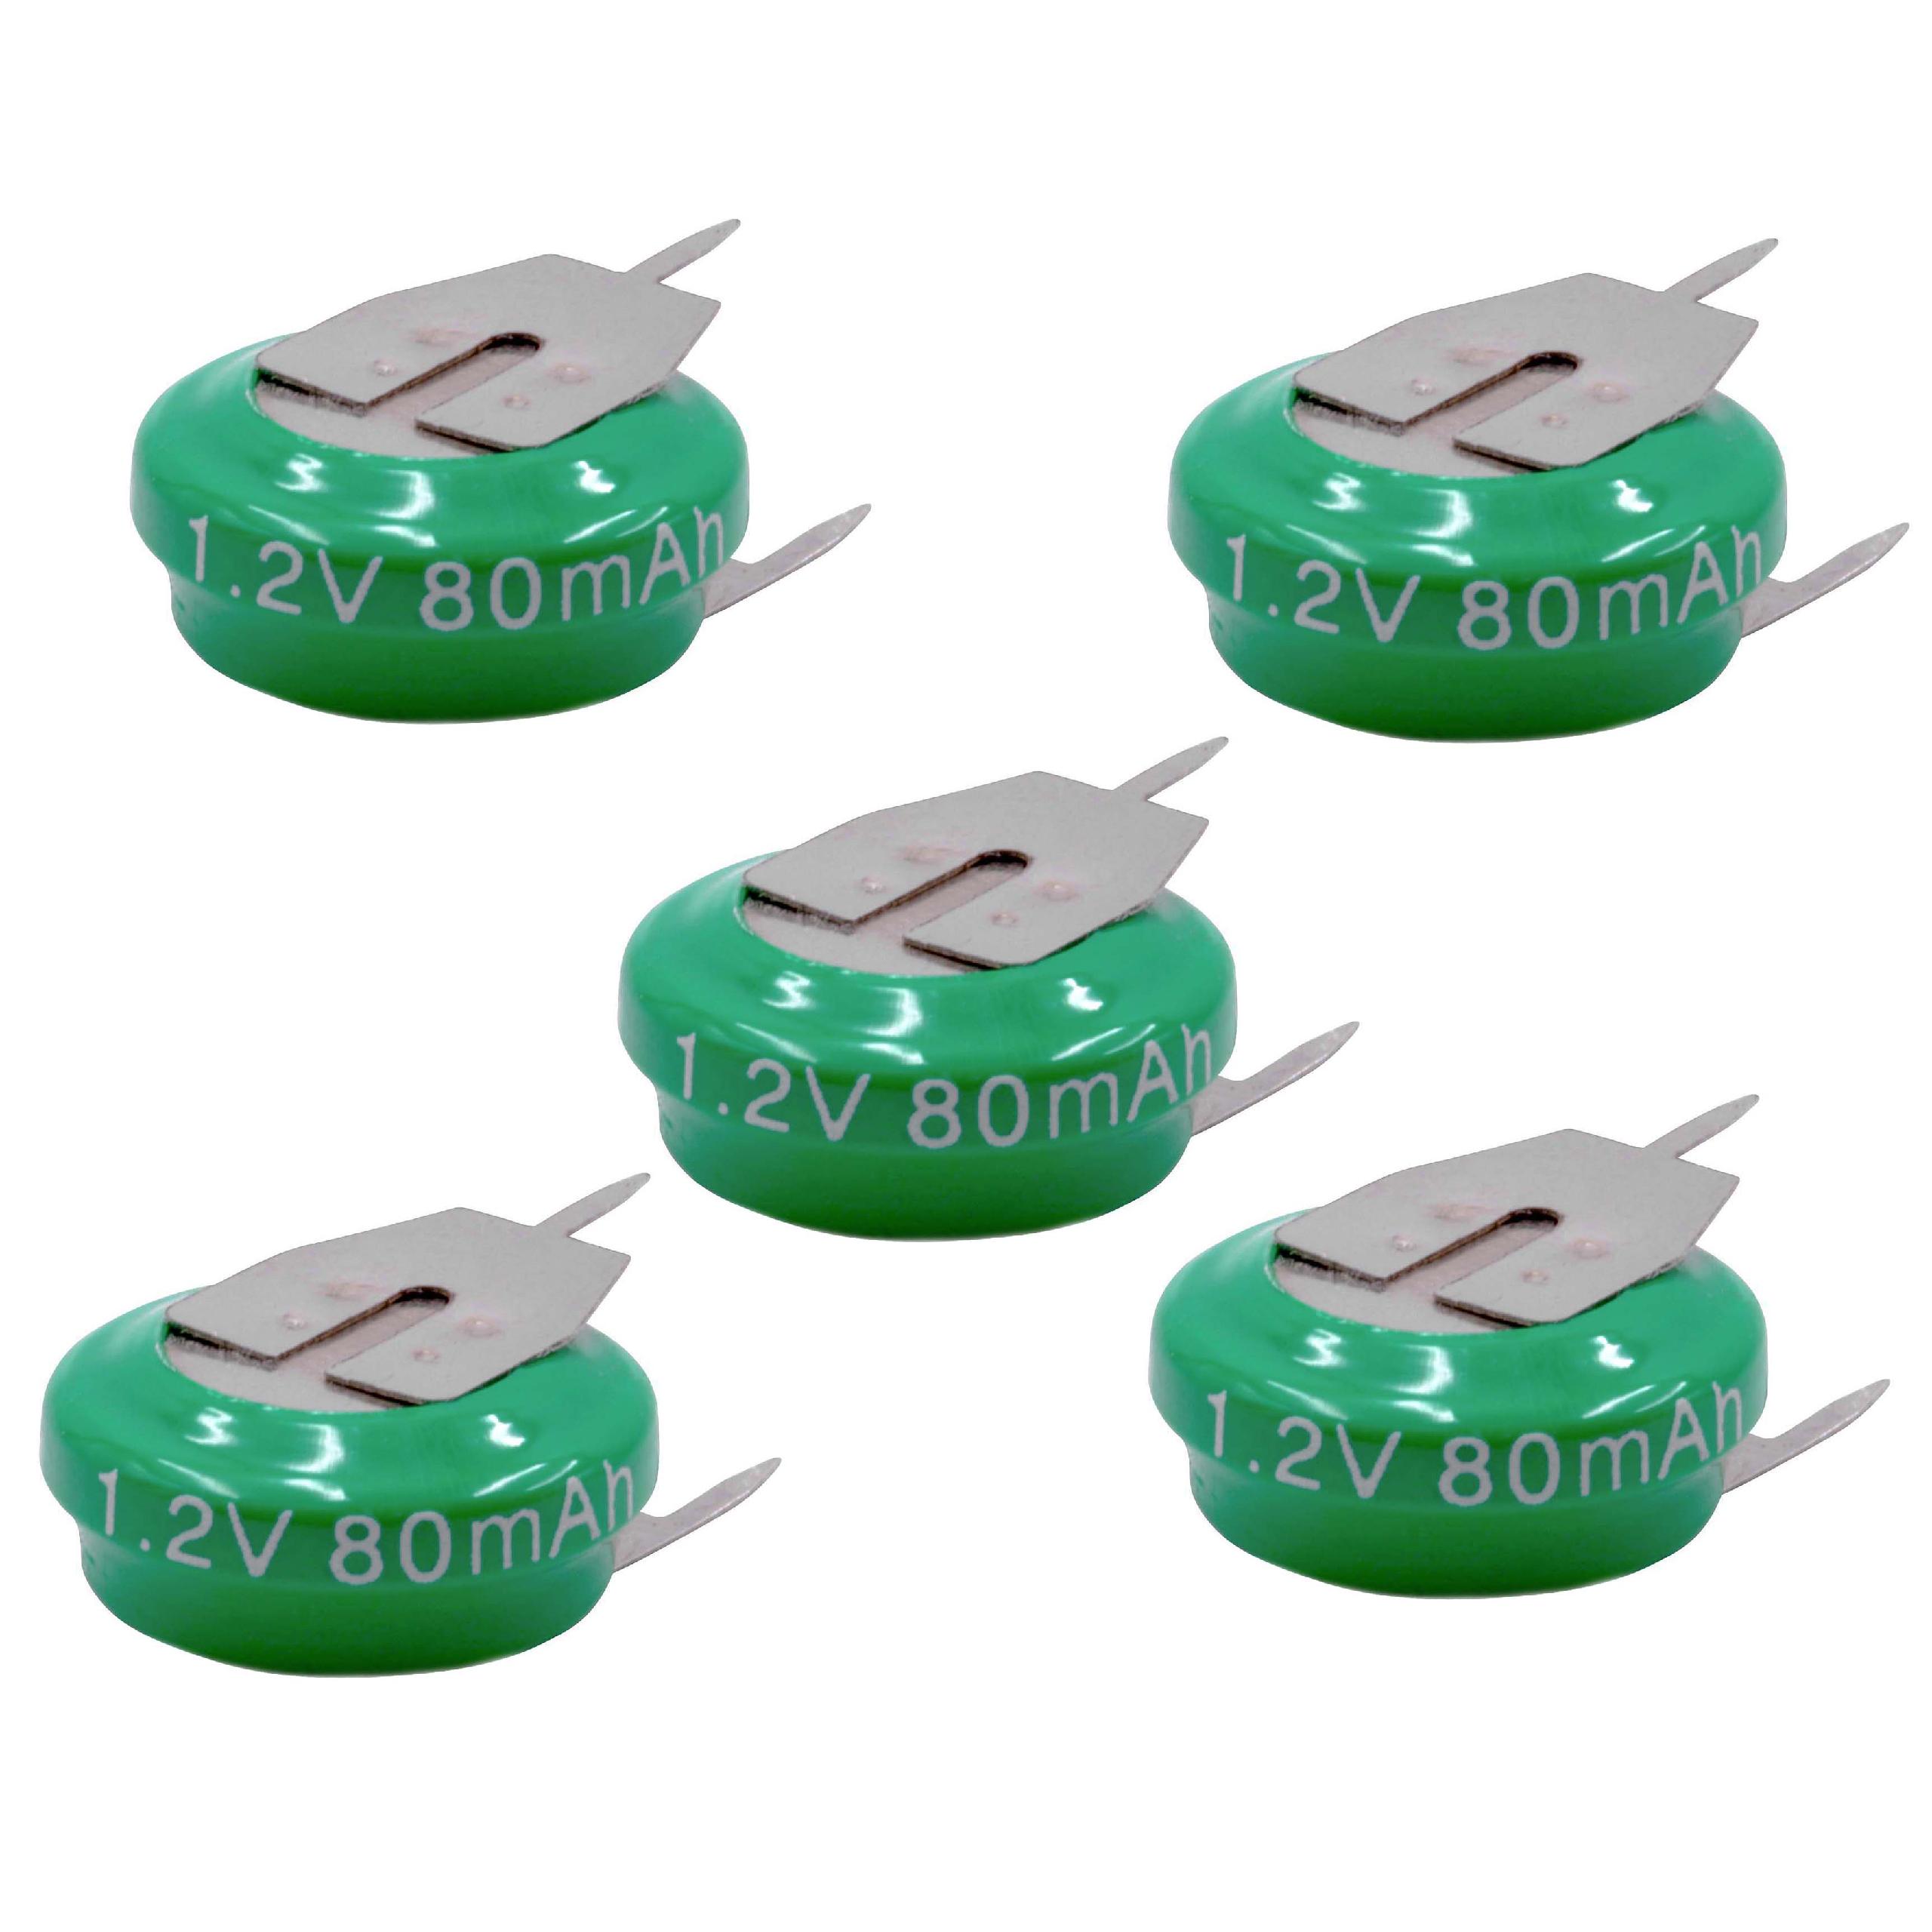 5x Button Cell Battery (1x Cell) Type V80H 3 Pins for Model Building Solar Lamps etc. - 80mAh 1.2V NiMH